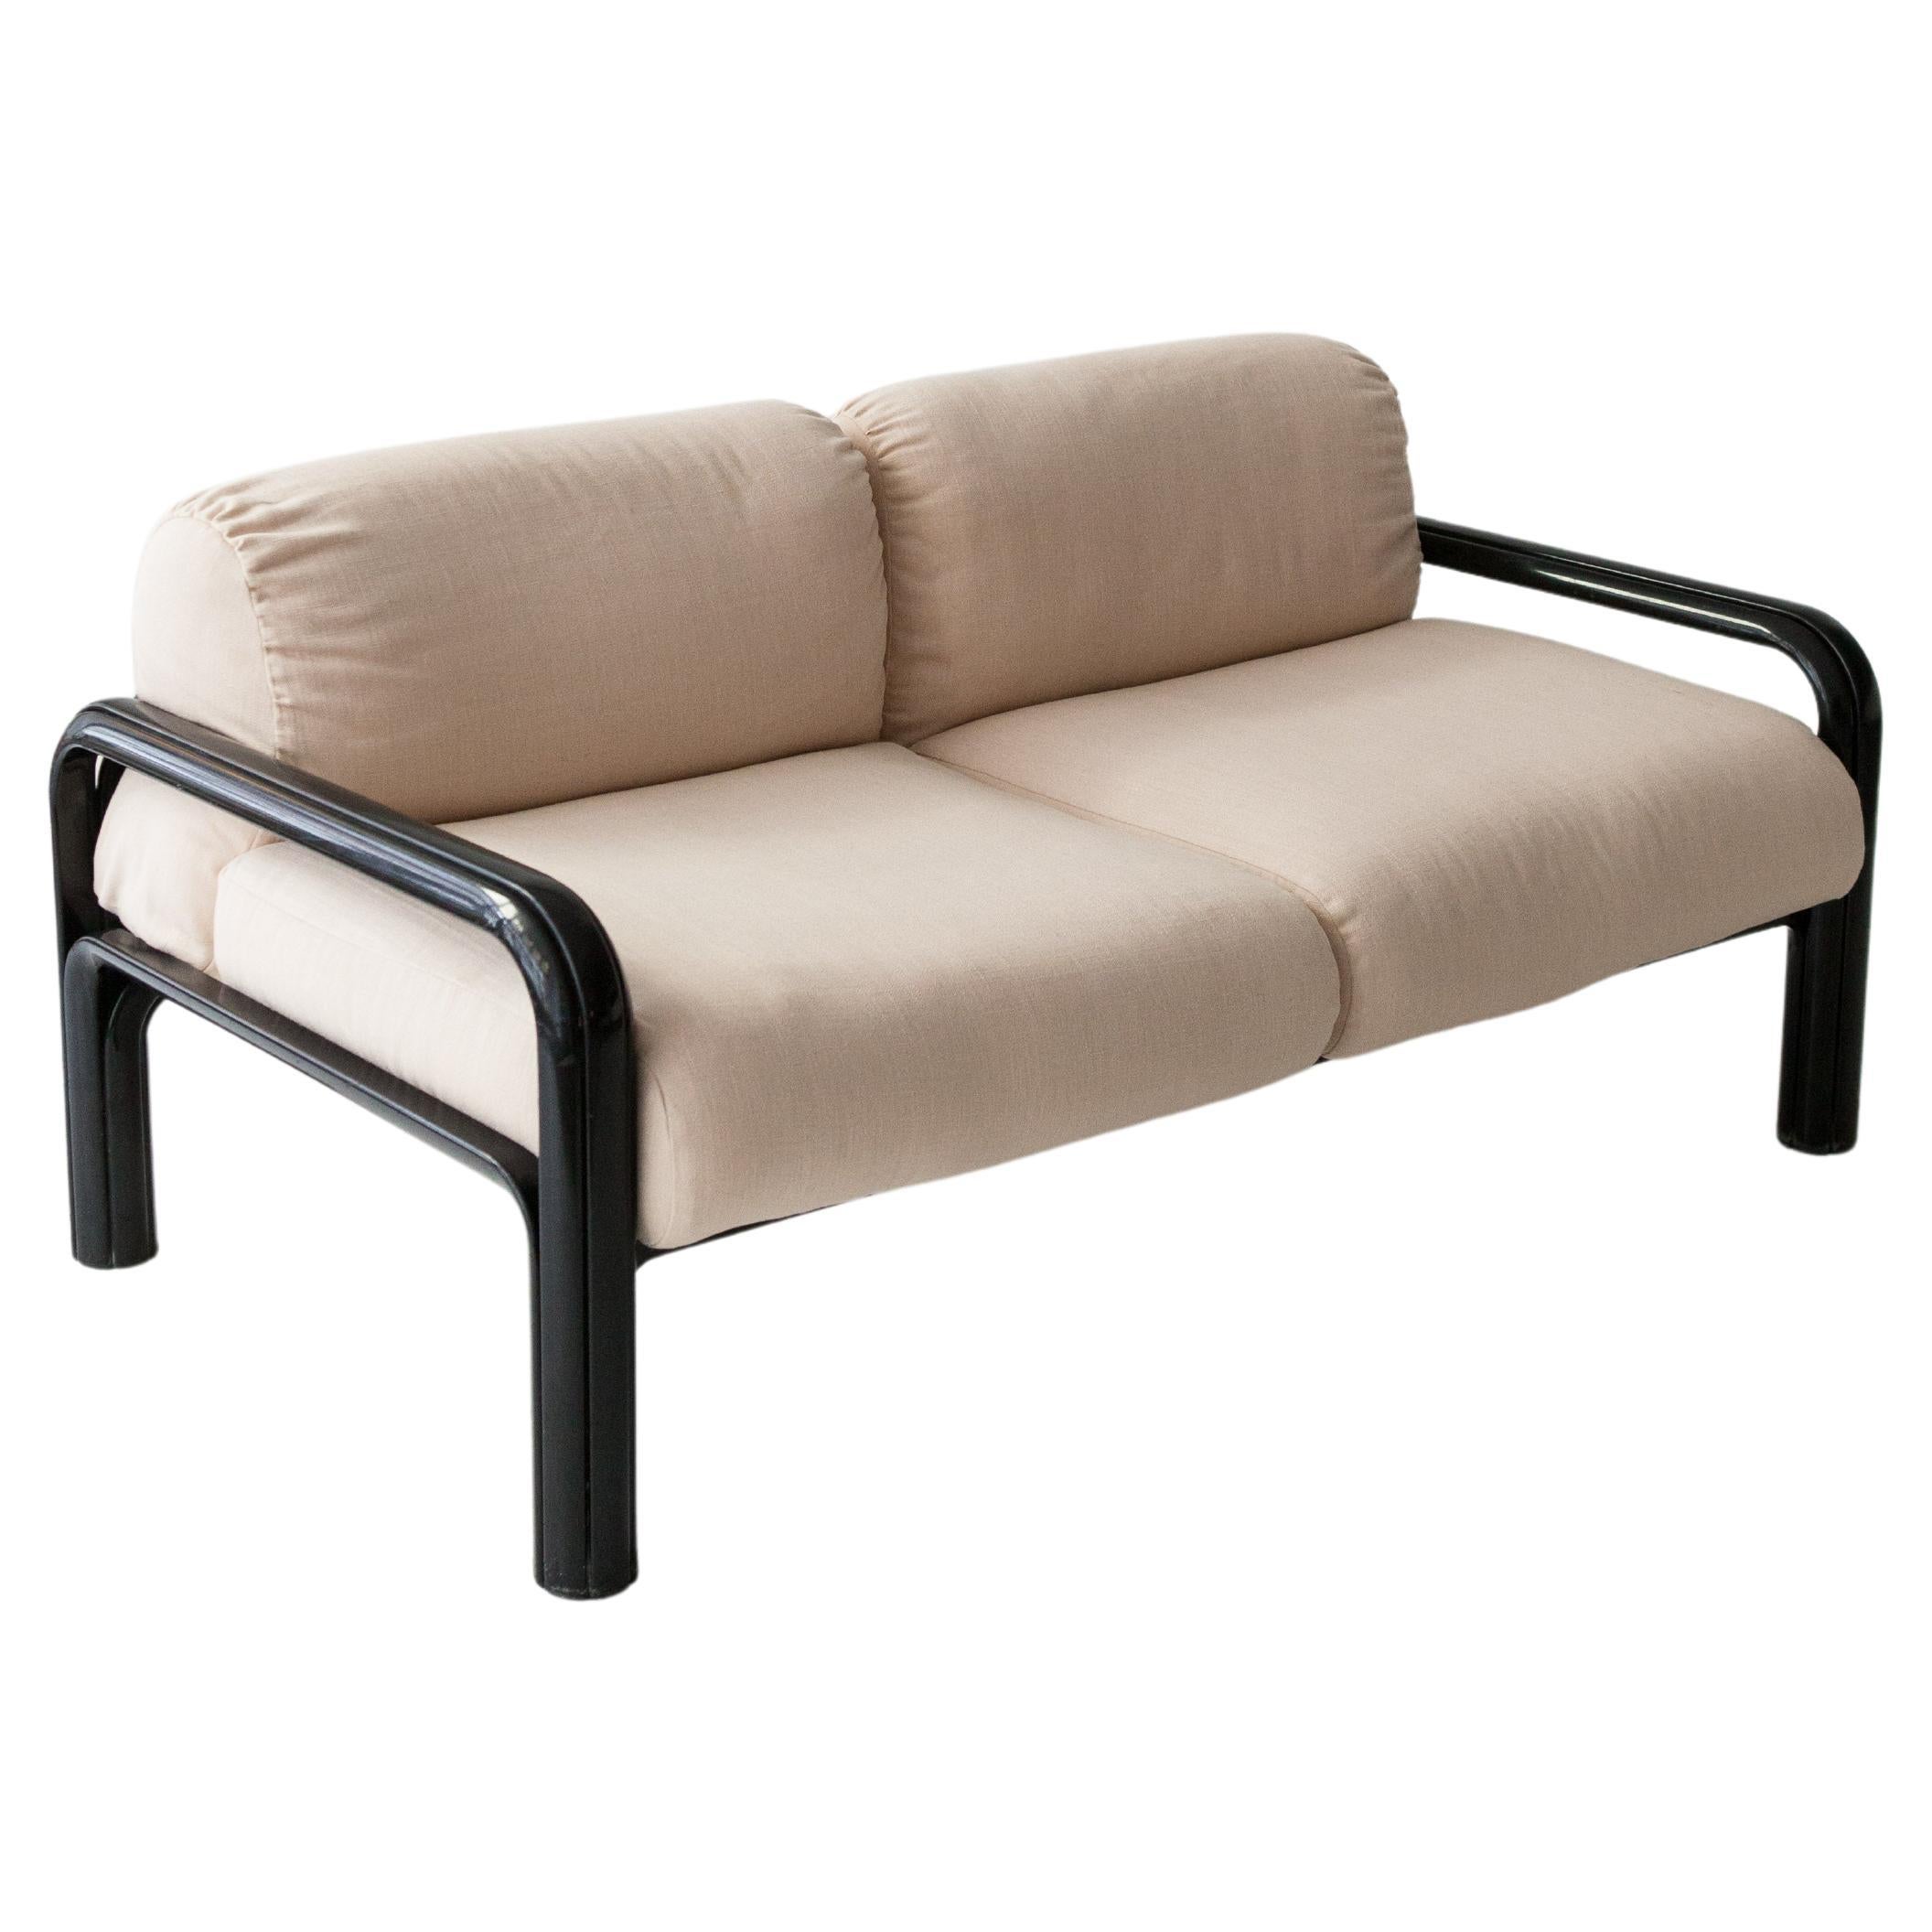 Loveseat sofa by Gae Aulenti for Knoll, 1970s For Sale